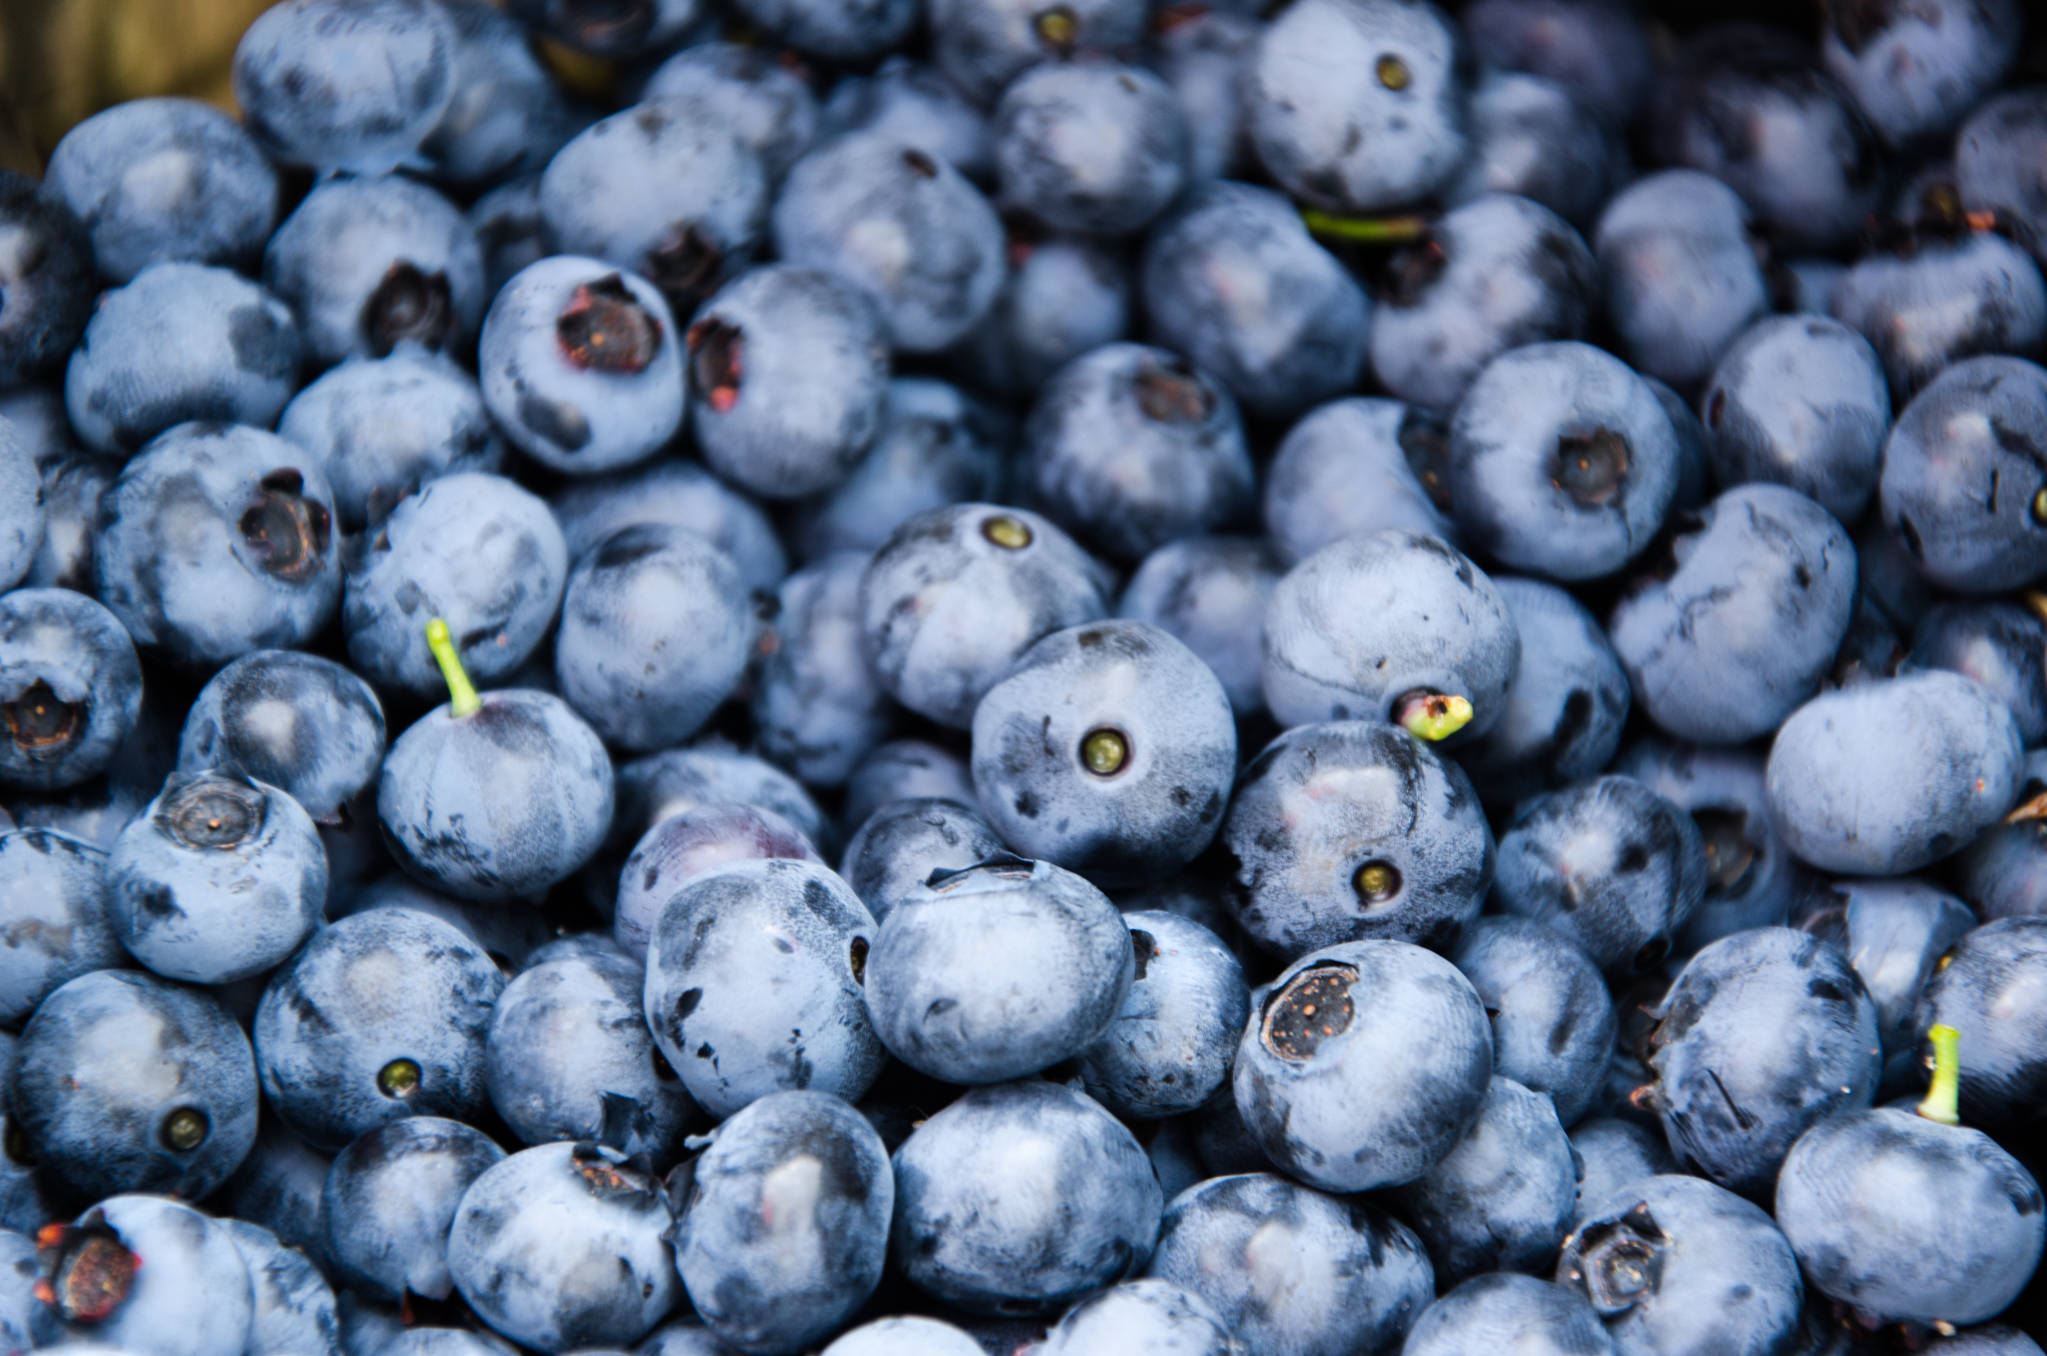 From Larsen Lake Blueberry Farms, a bucket of freshly picked blueberries.